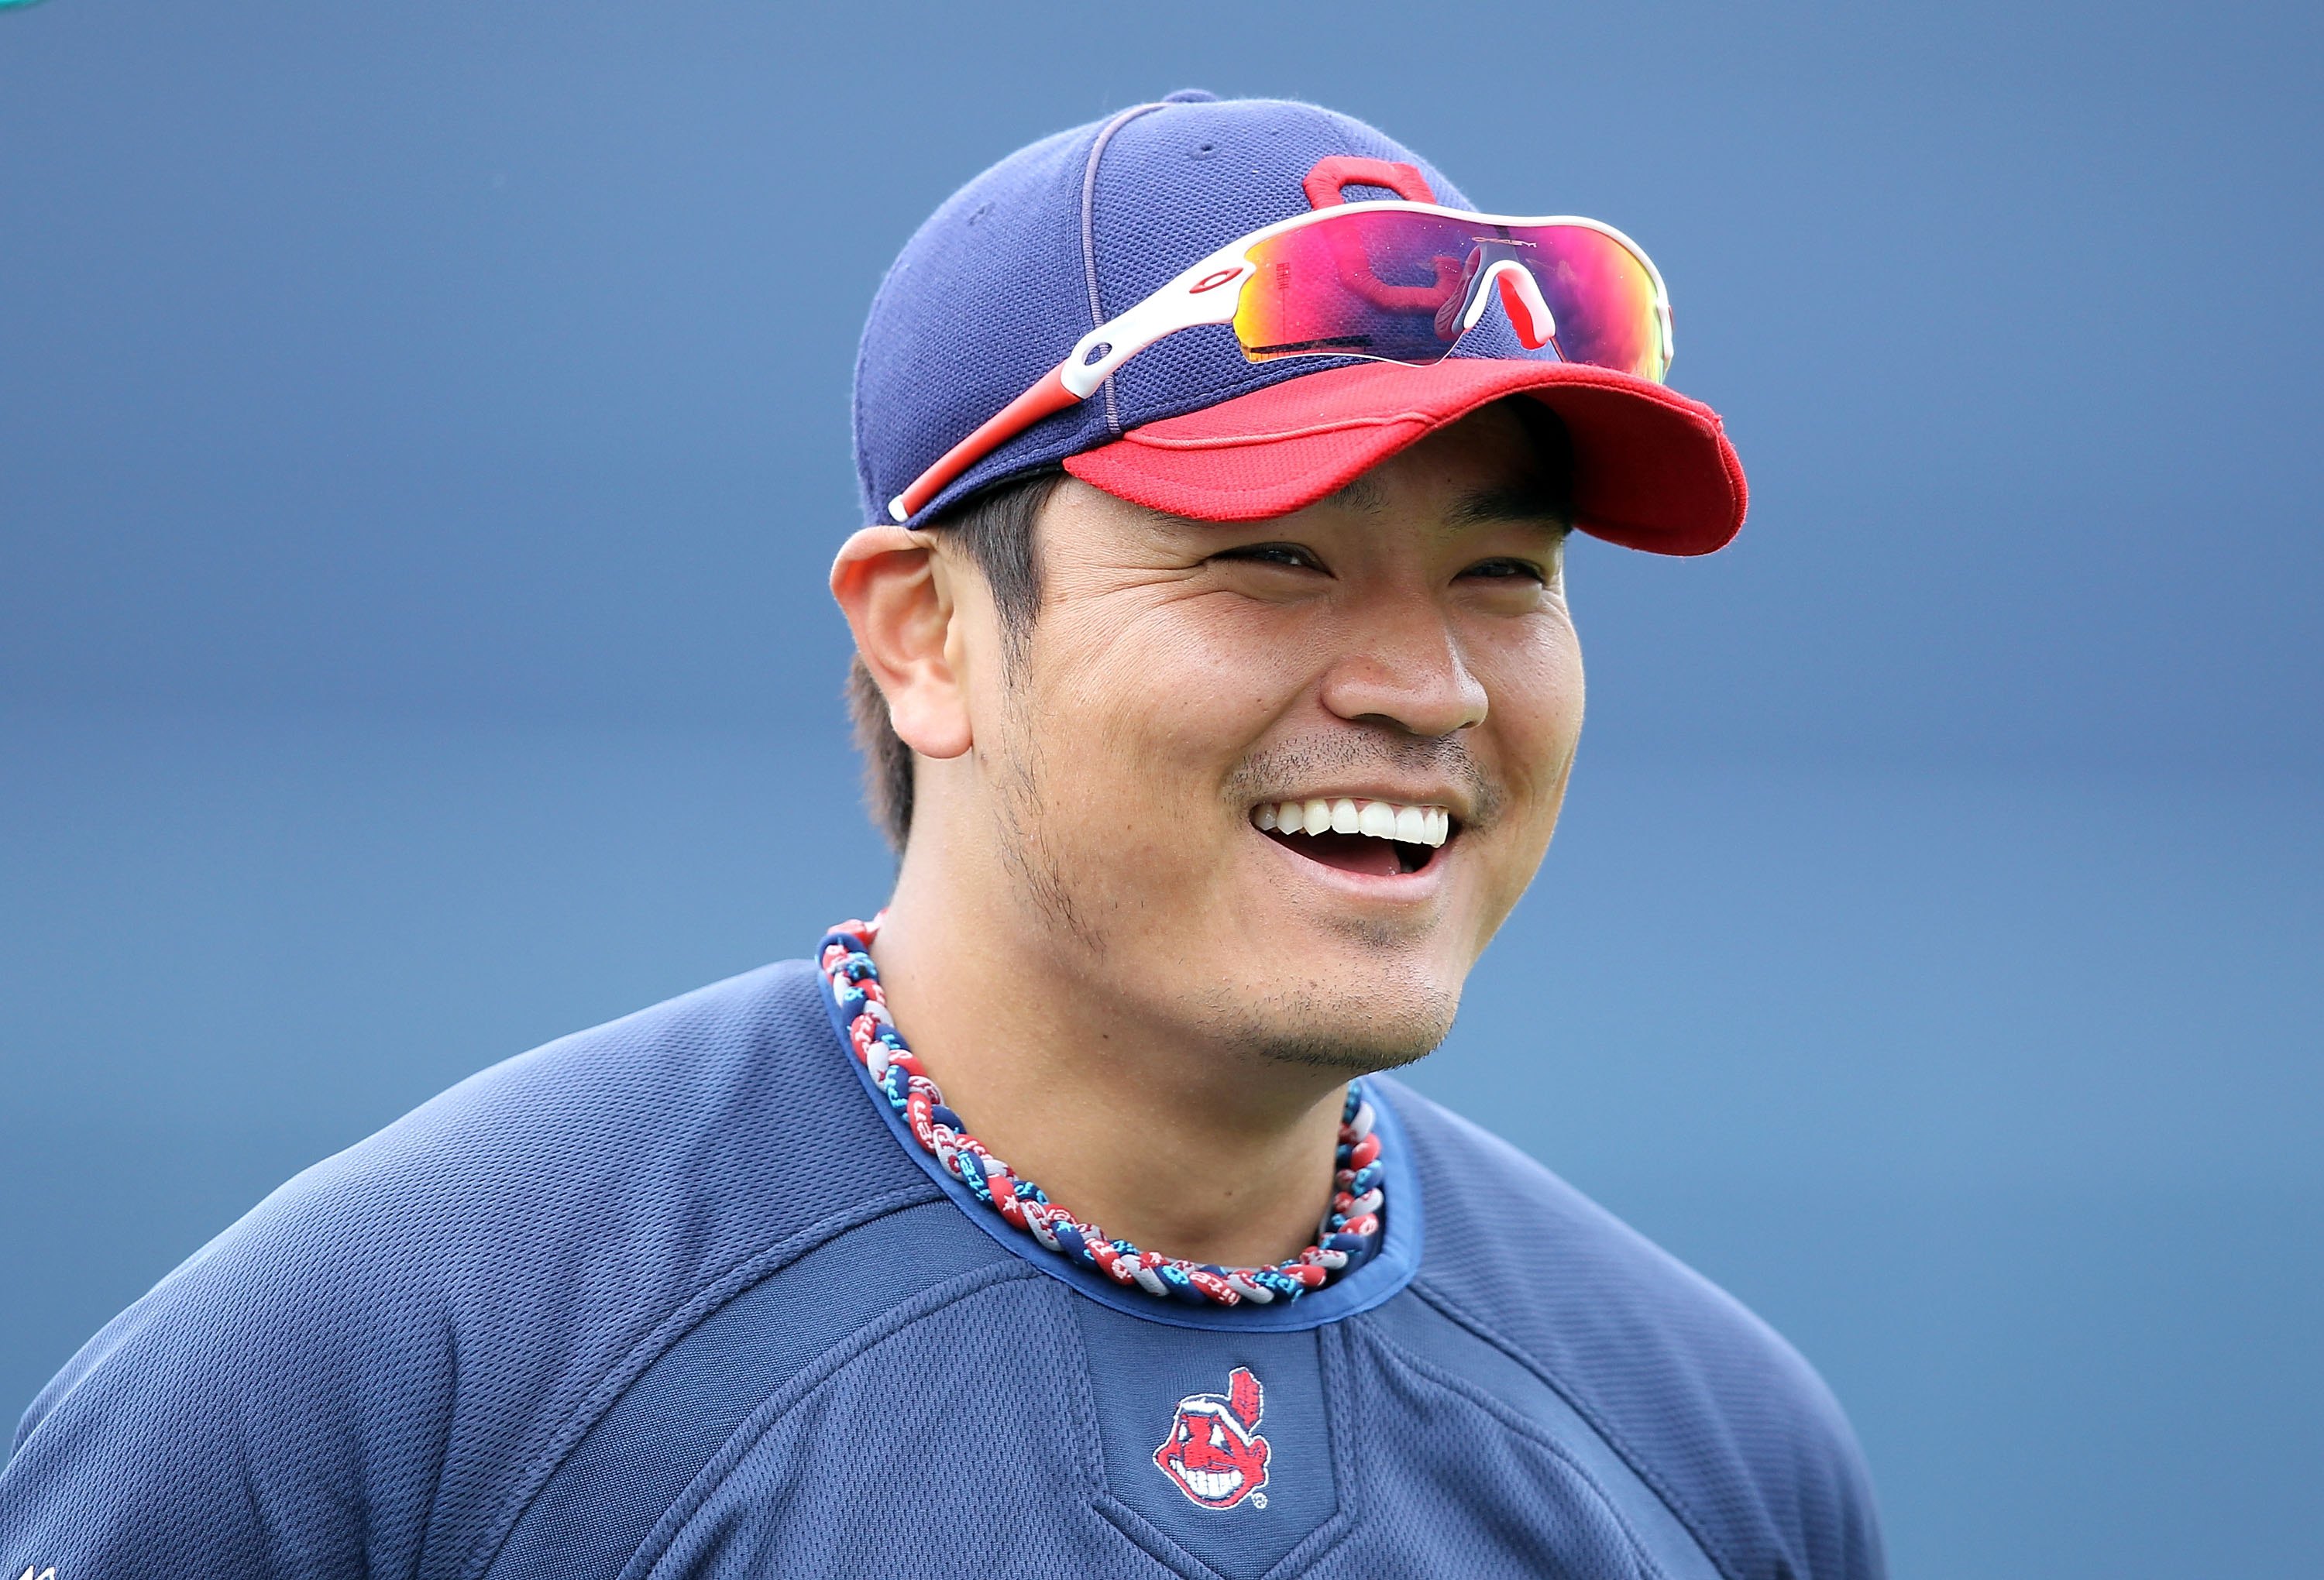 PEORIA, AZ - MARCH 09:  Shin-Soo Choo #17 of the Cleveland Indians warms up before the MLB spring training game against the Seattle Mariners at Peoria Stadium on March 9, 2010 in Peoria, Arizona. The Indians defeated the Mariners 6-4.  (Photo by Christian